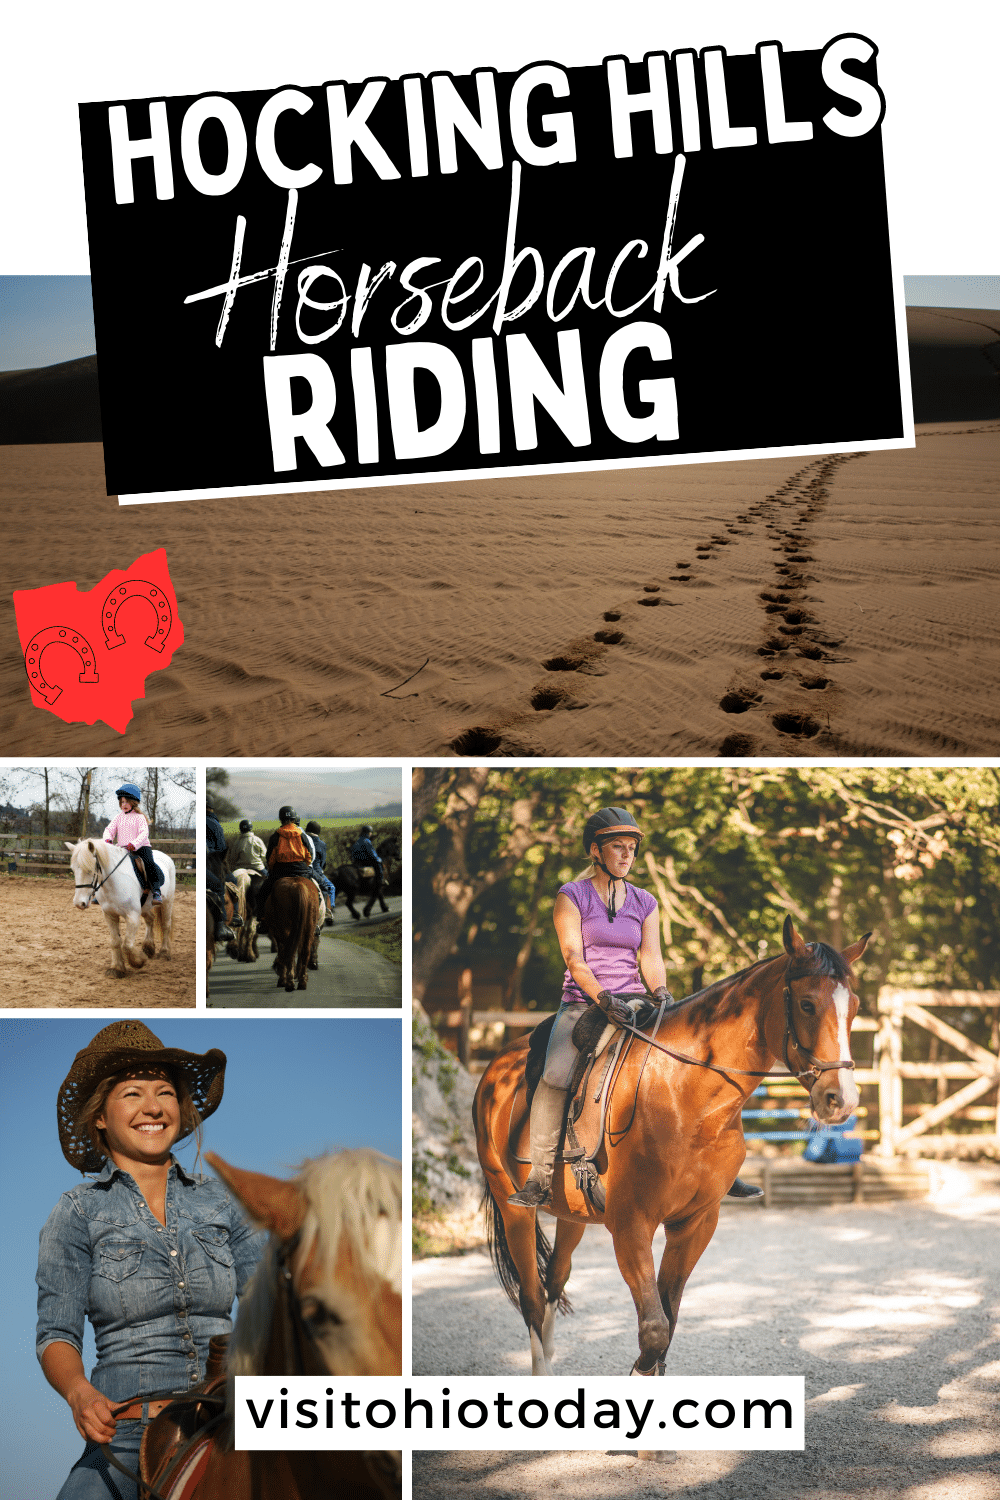 Hocking Hills has some of the best sights to view on horseback. Here’s our round-up of some of the best places to go Hocking Hills Horseback Riding! | Horseback Riding In Ohio | Horses In Ohio | Hocking County